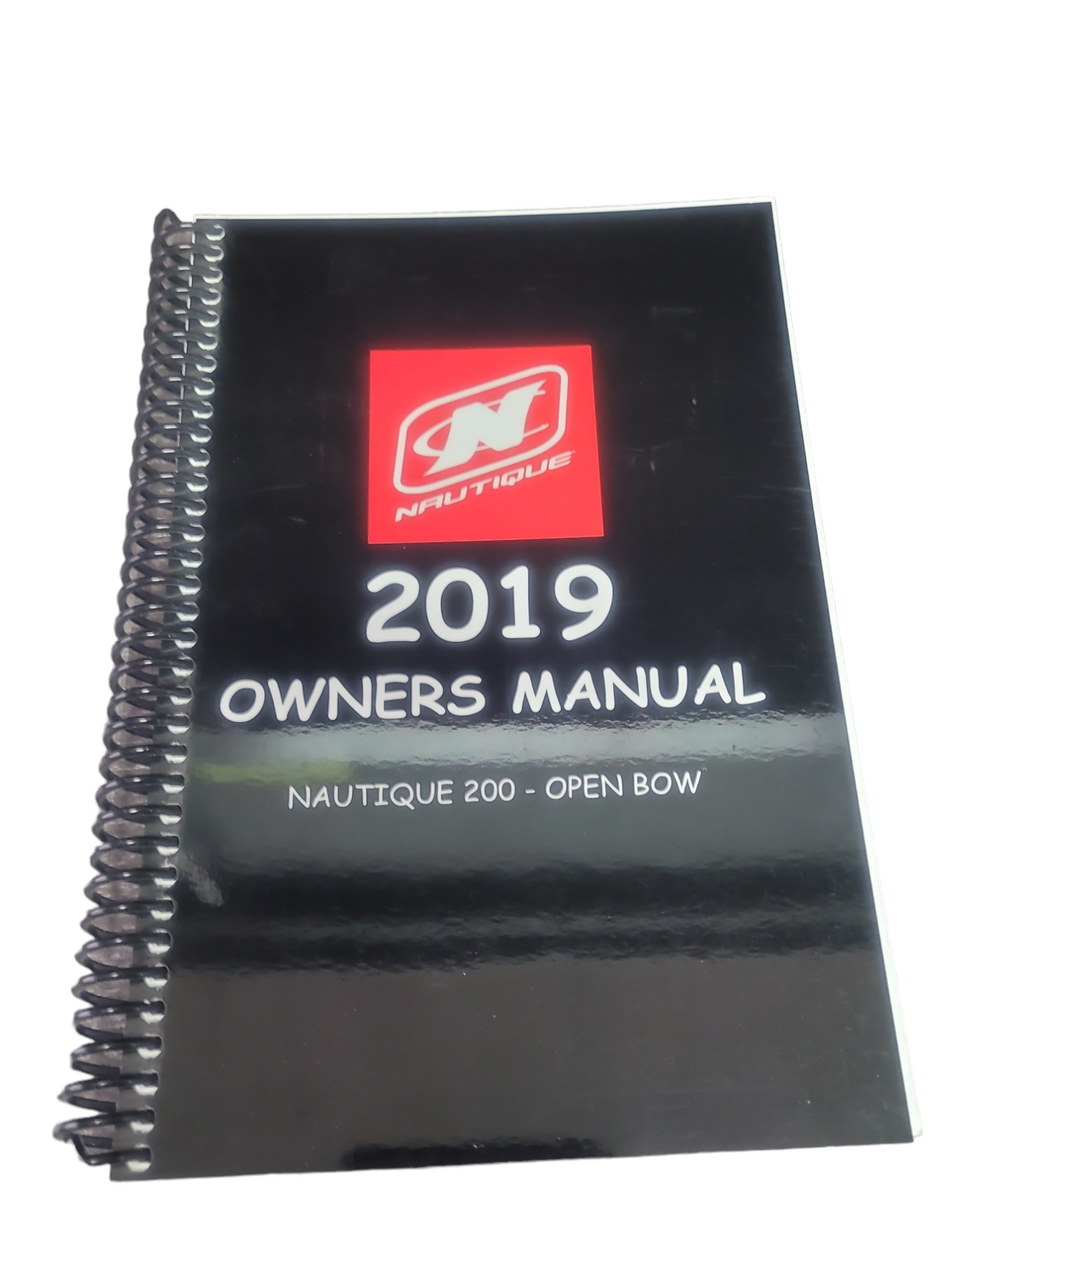 OWNERS MANUAL- 2019 NAUTIQUE 200 OPEN BOW